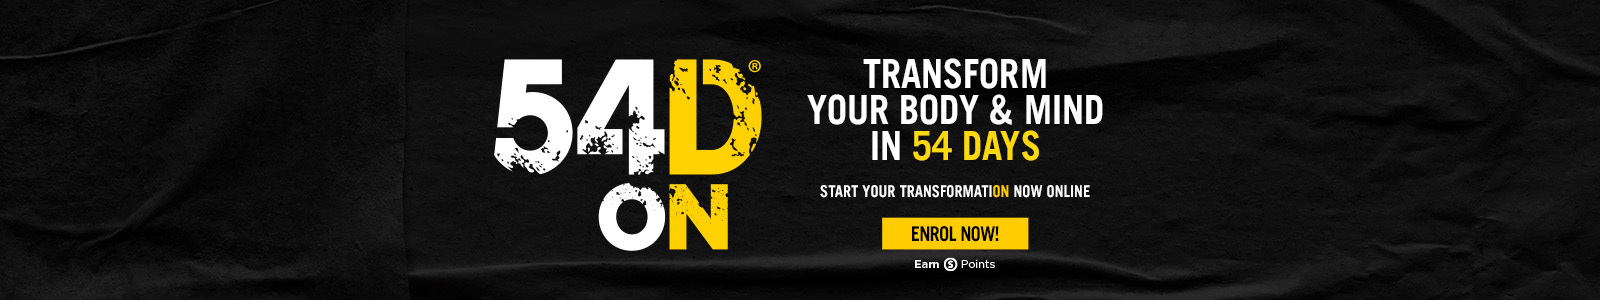 54D on. Transform your body & mind in 54 days. Start your transformation now online. Enrol Now. Earn Points